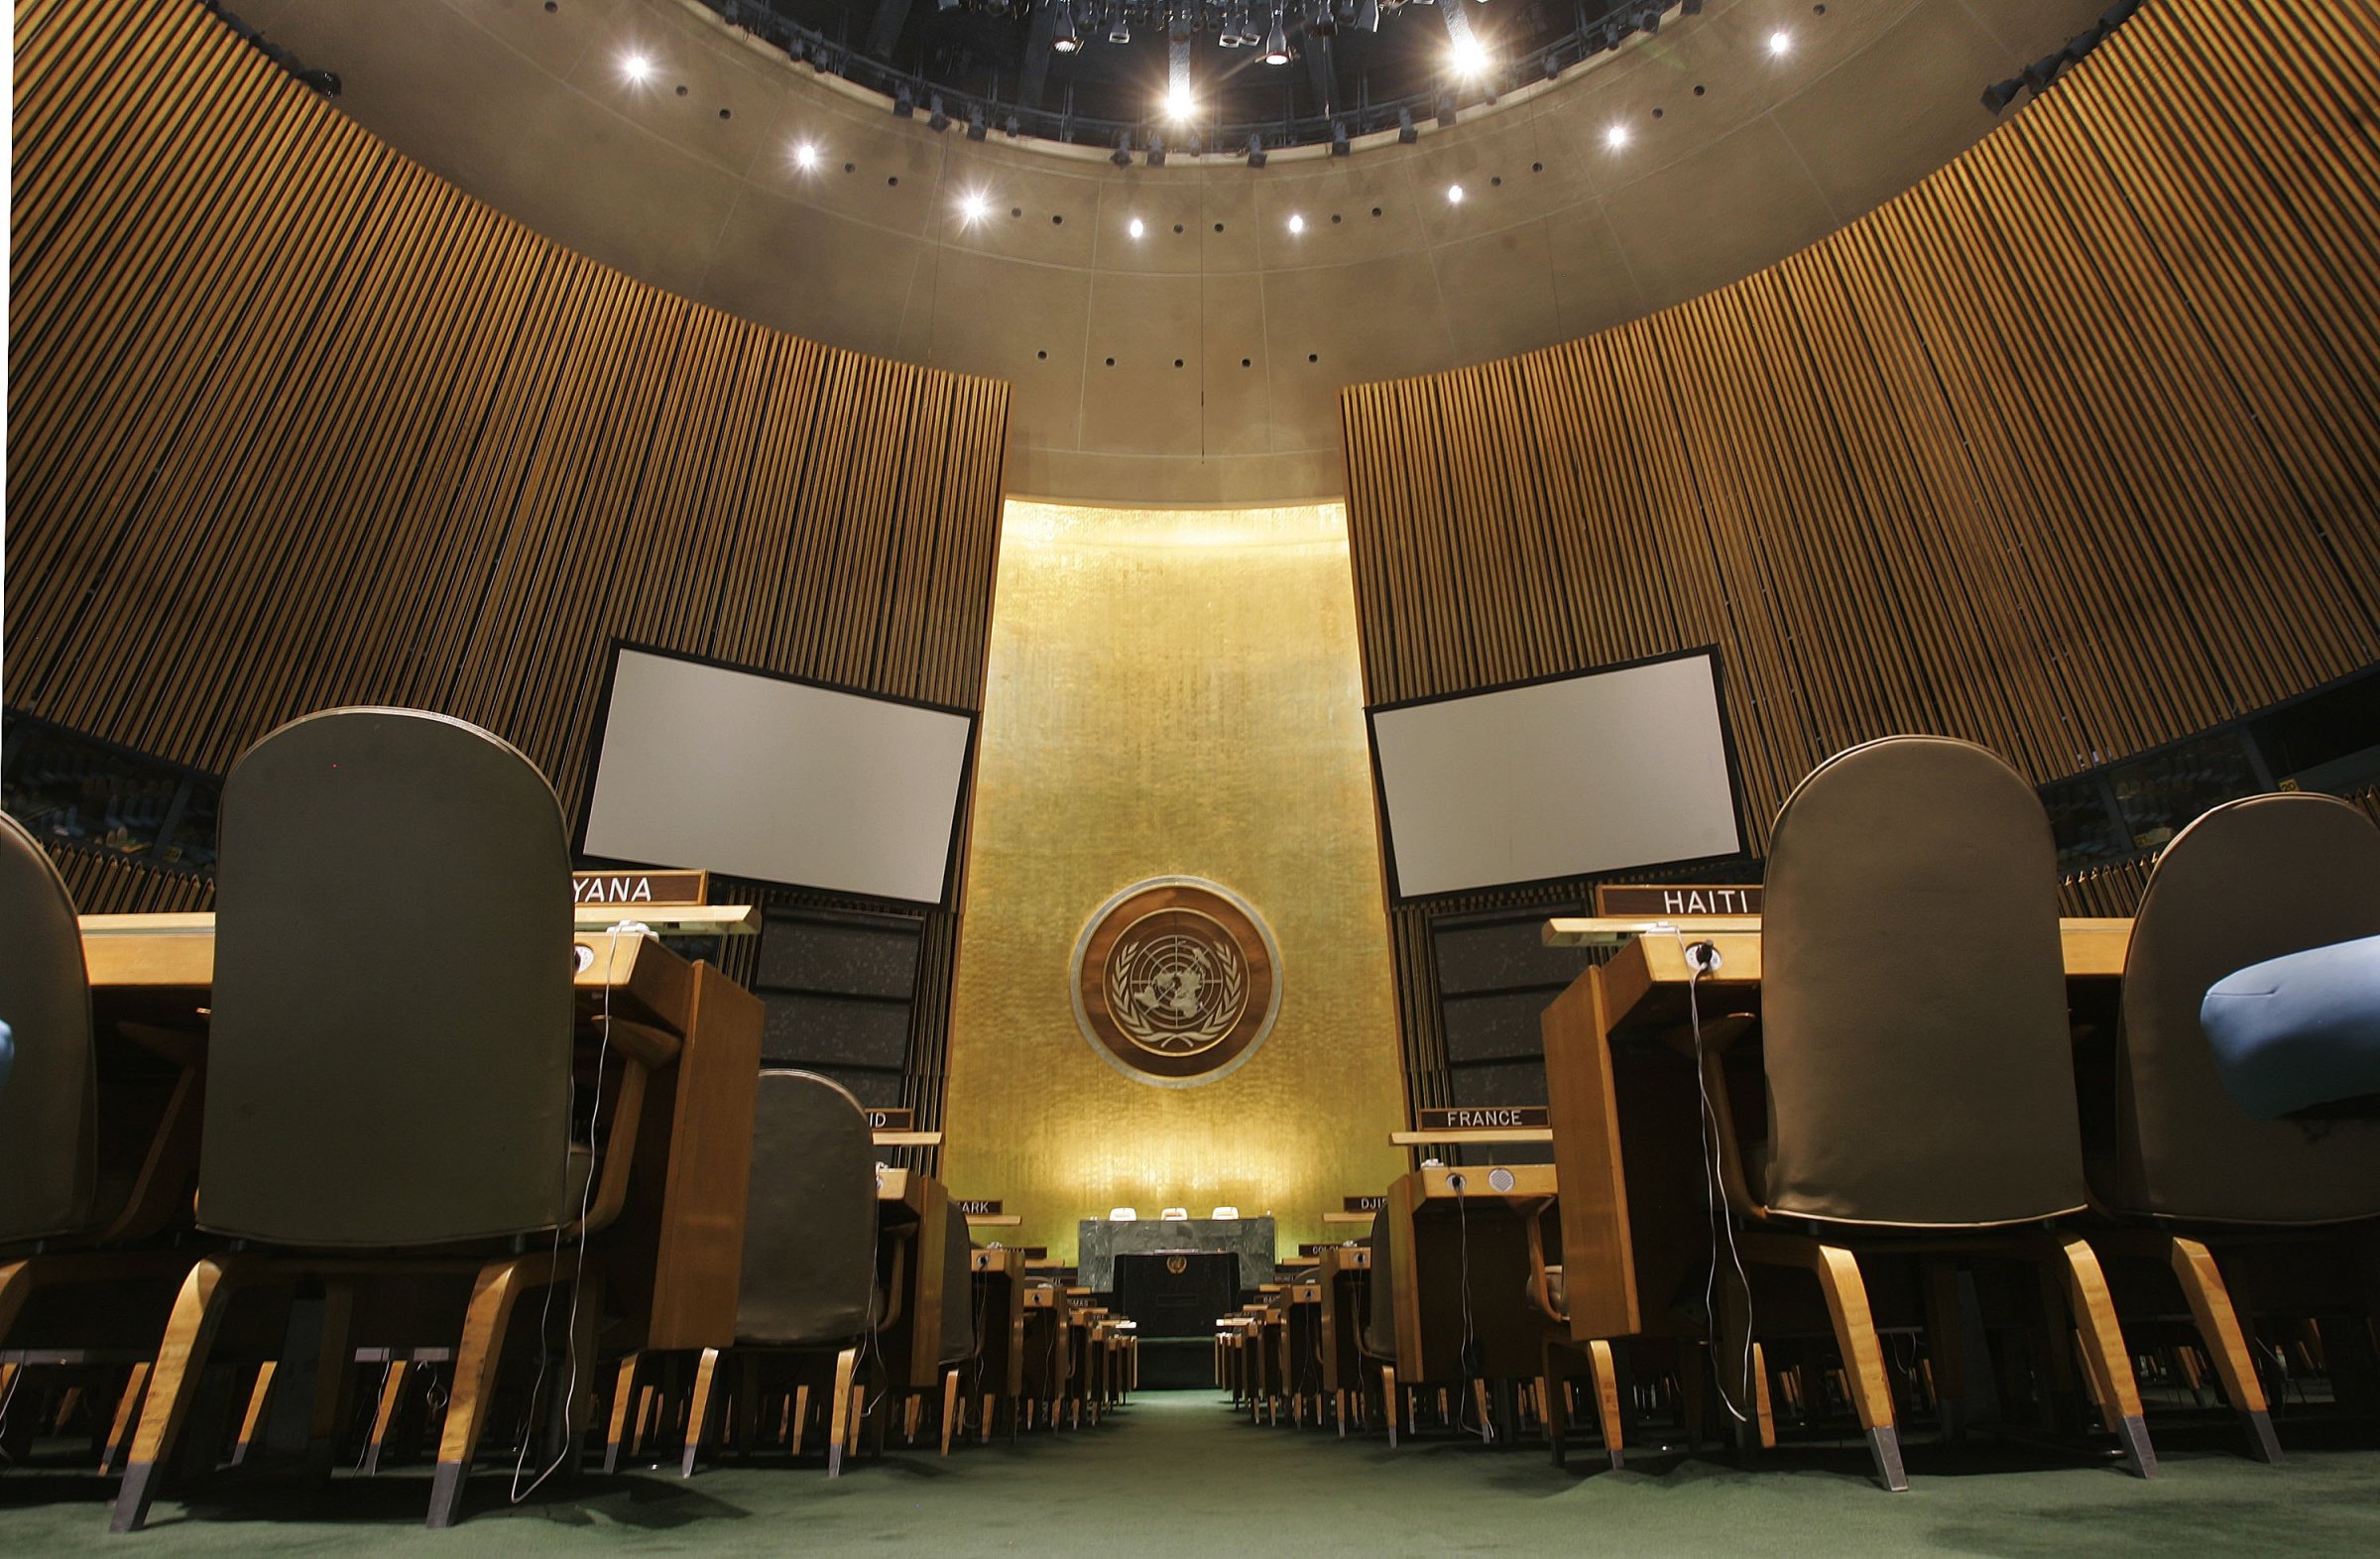 Behind The Scenes At The United Nations